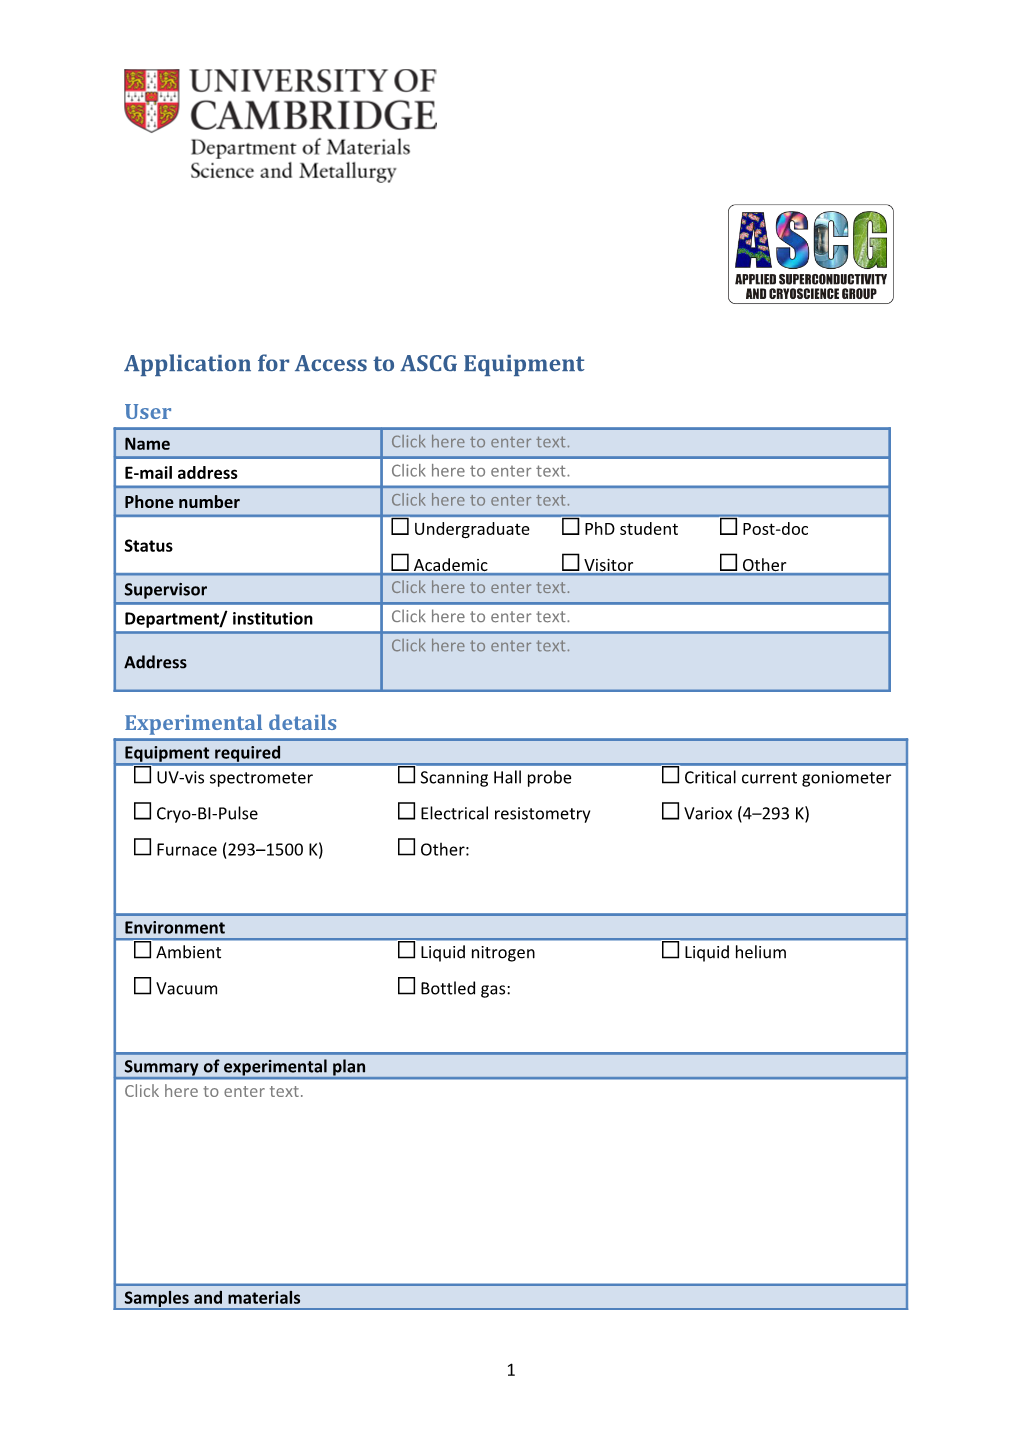 Application for Access to ASCG Equipment